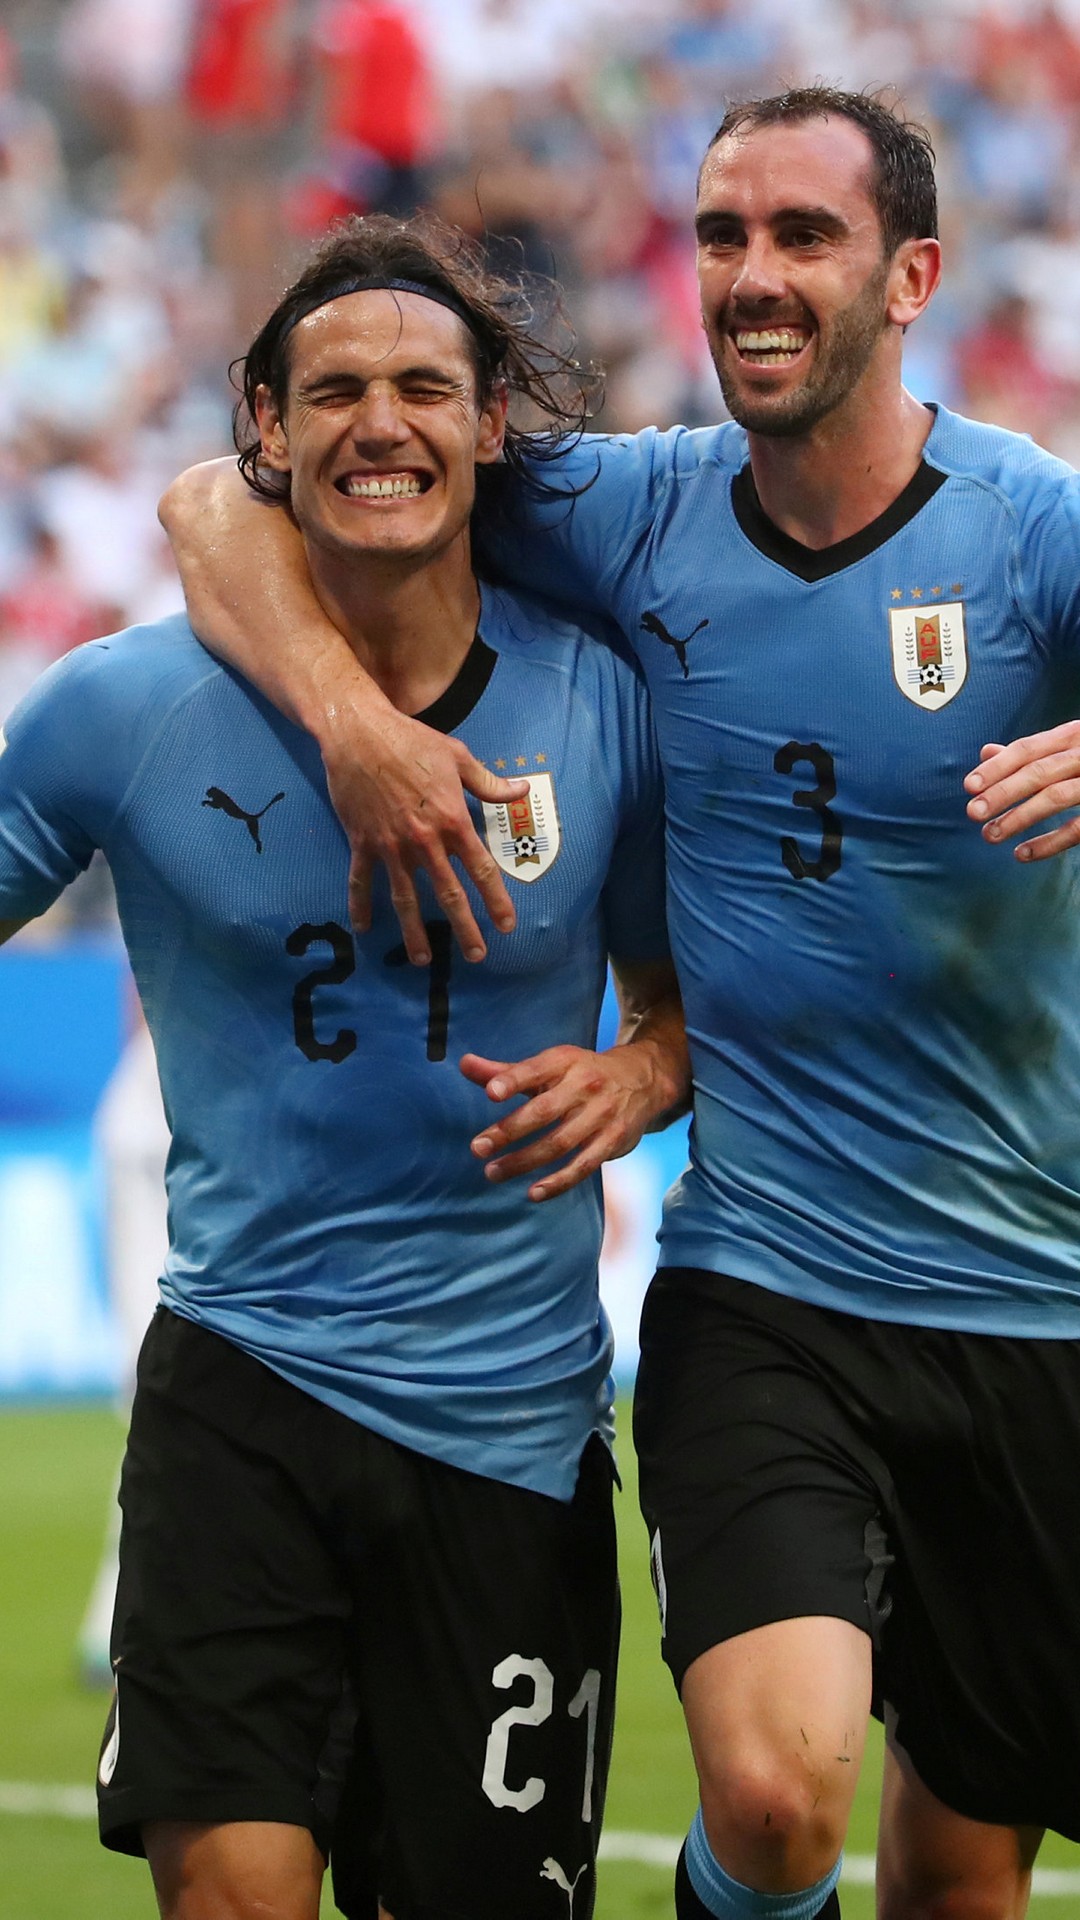 Android Wallpaper Uruguay National Team with image resolution 1080x1920 pixel. You can make this wallpaper for your Android backgrounds, Tablet, Smartphones Screensavers and Mobile Phone Lock Screen